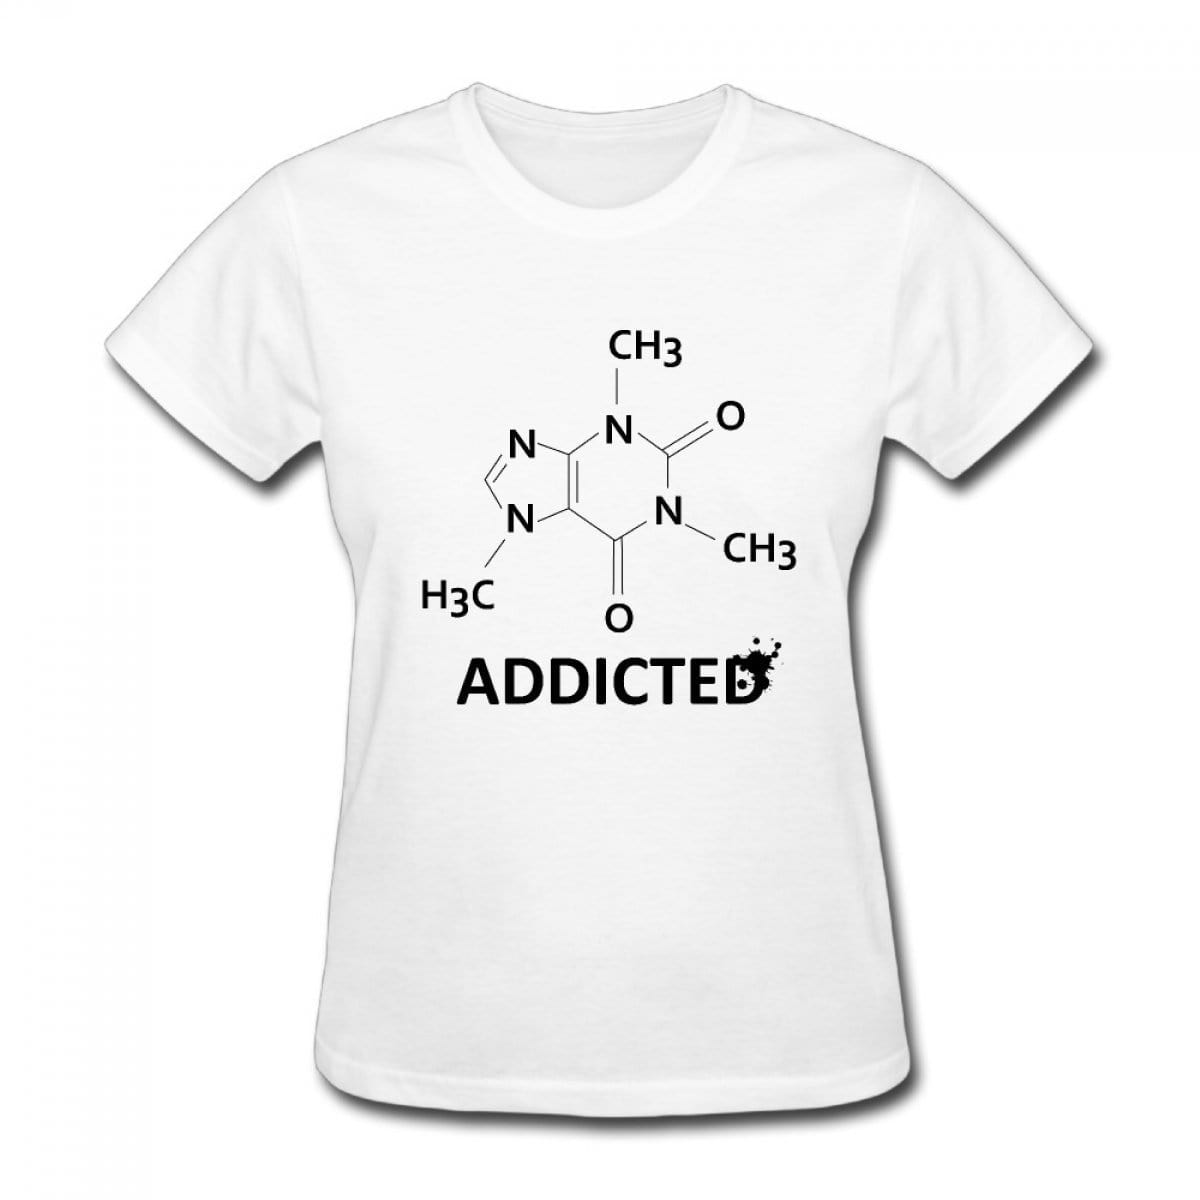 T-Shirt "Science Addict" T-Shirt - 100% Cotton The Sexy Scientist